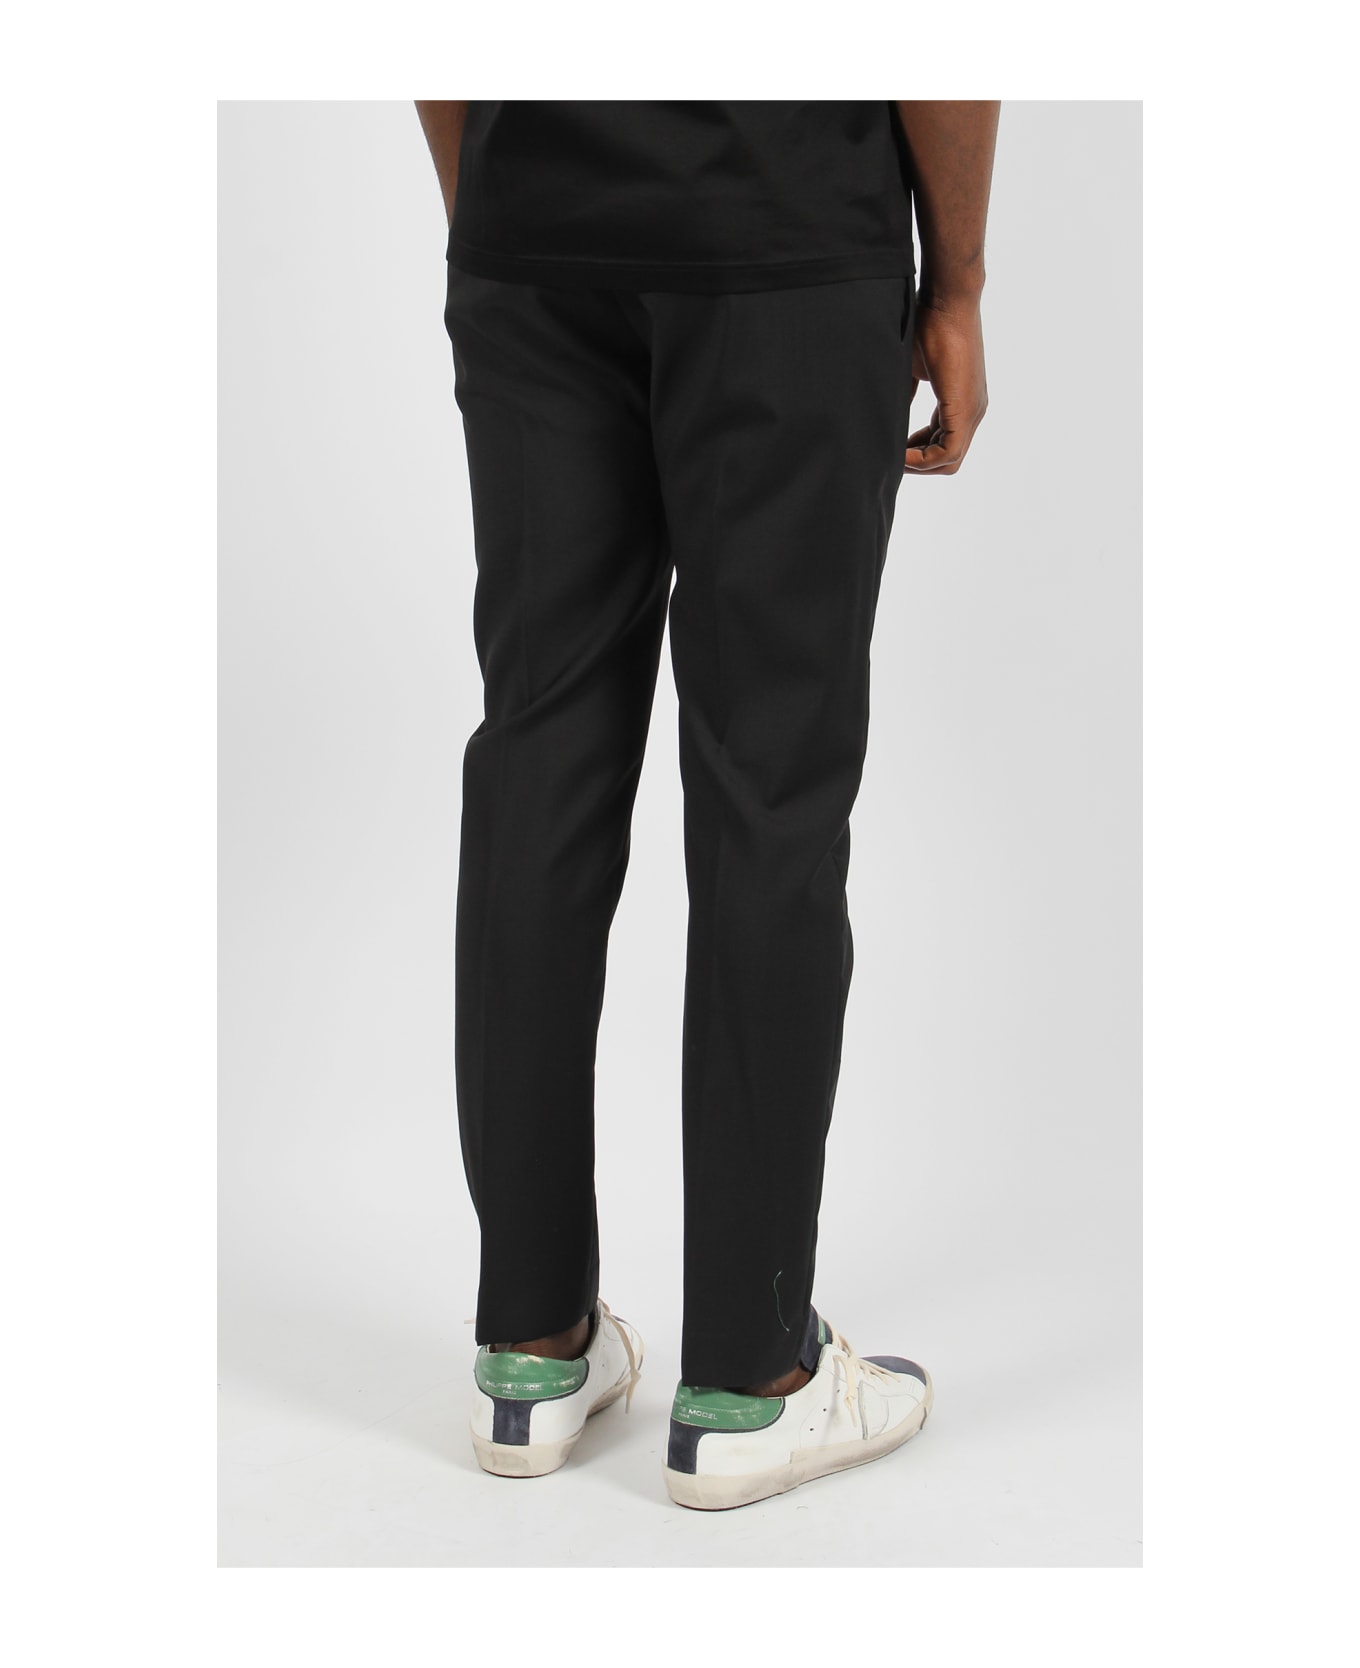 Low Brand Rivale Tropical Wool Trousers - Black